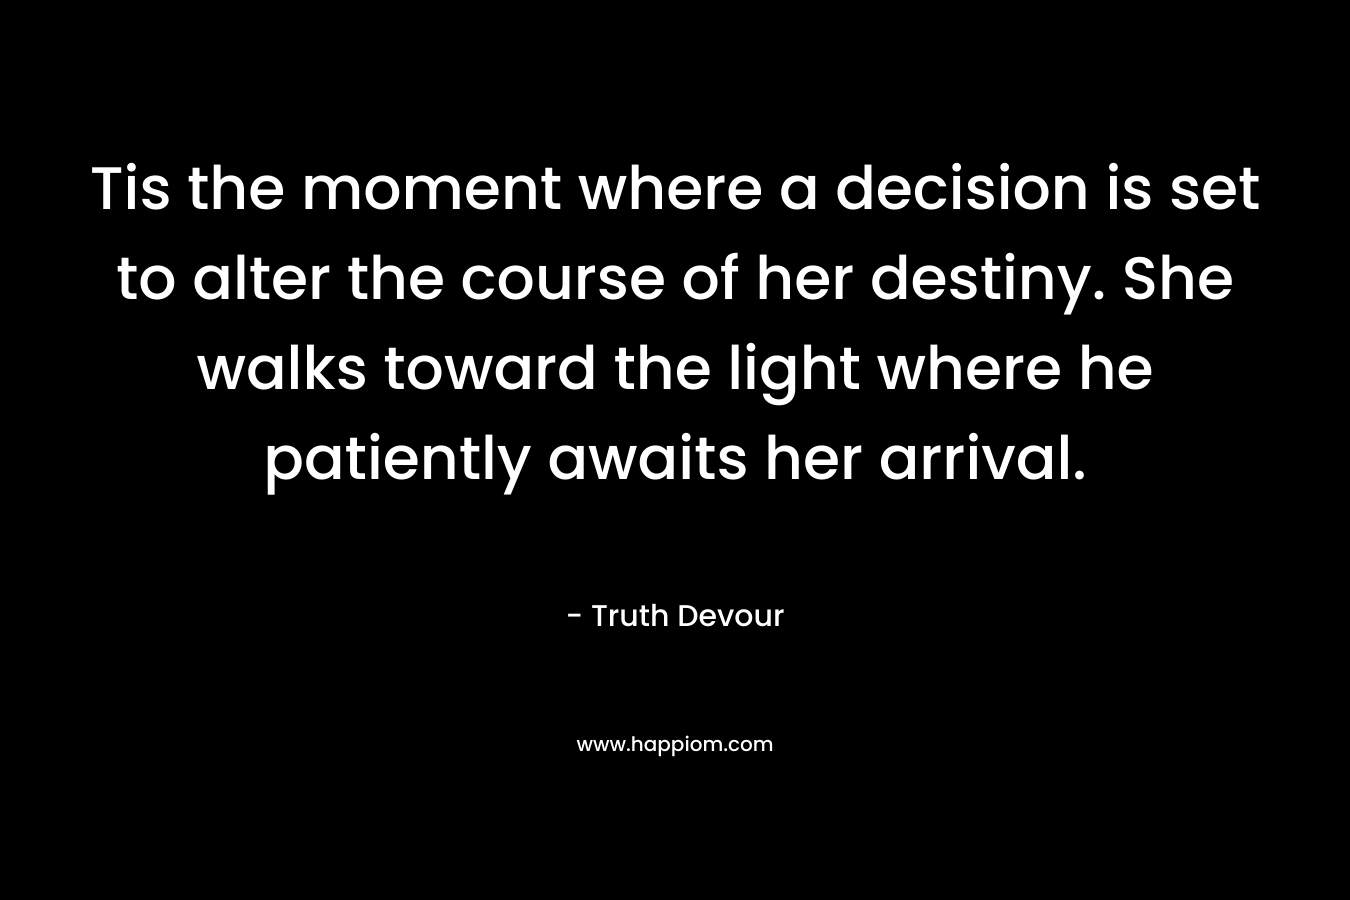 Tis the moment where a decision is set to alter the course of her destiny. She walks toward the light where he patiently awaits her arrival.